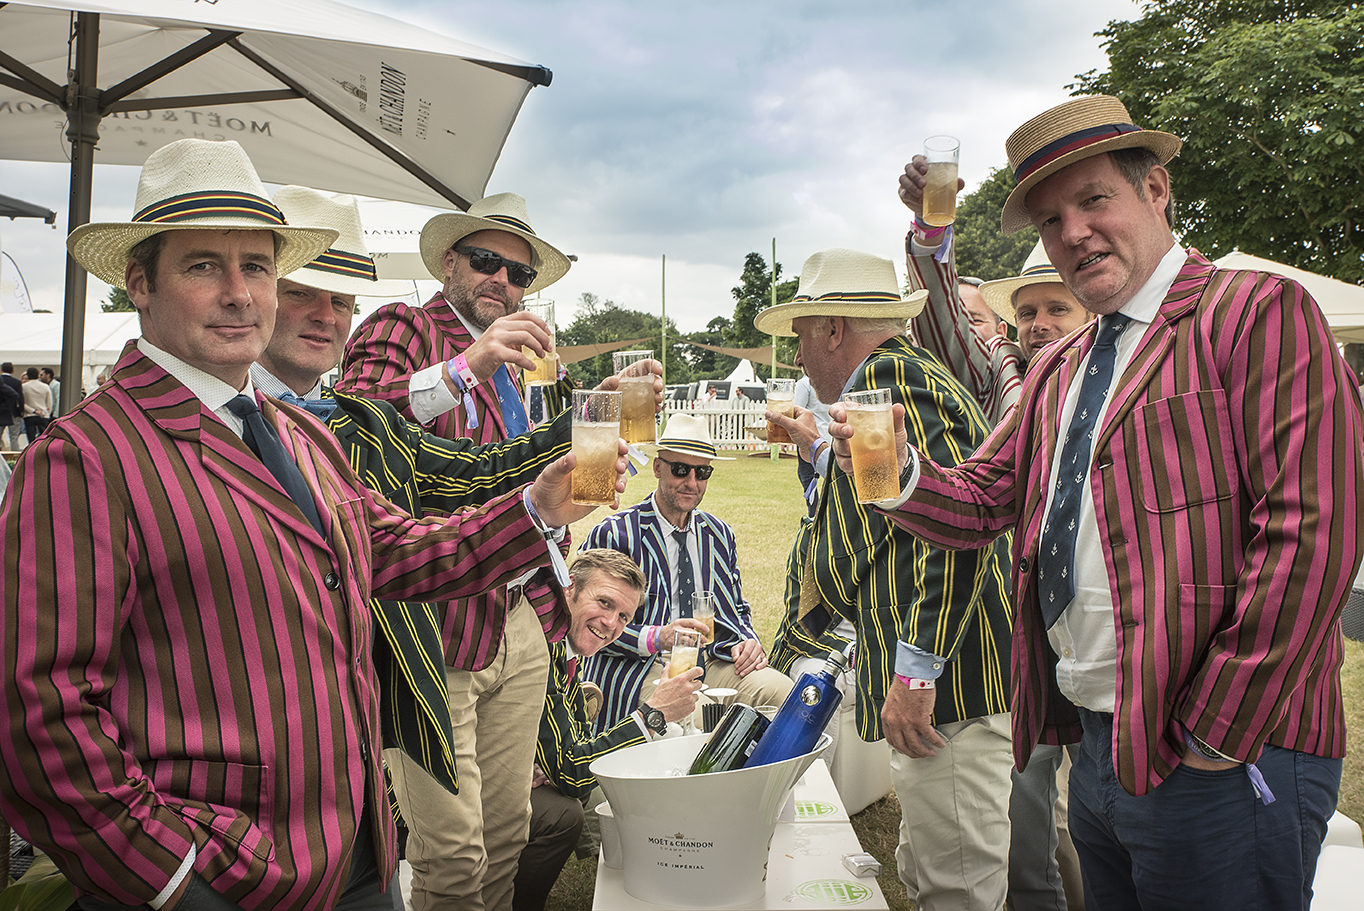 Henley Regatta Chinawhite hosts an exclusive VIP party and you’re